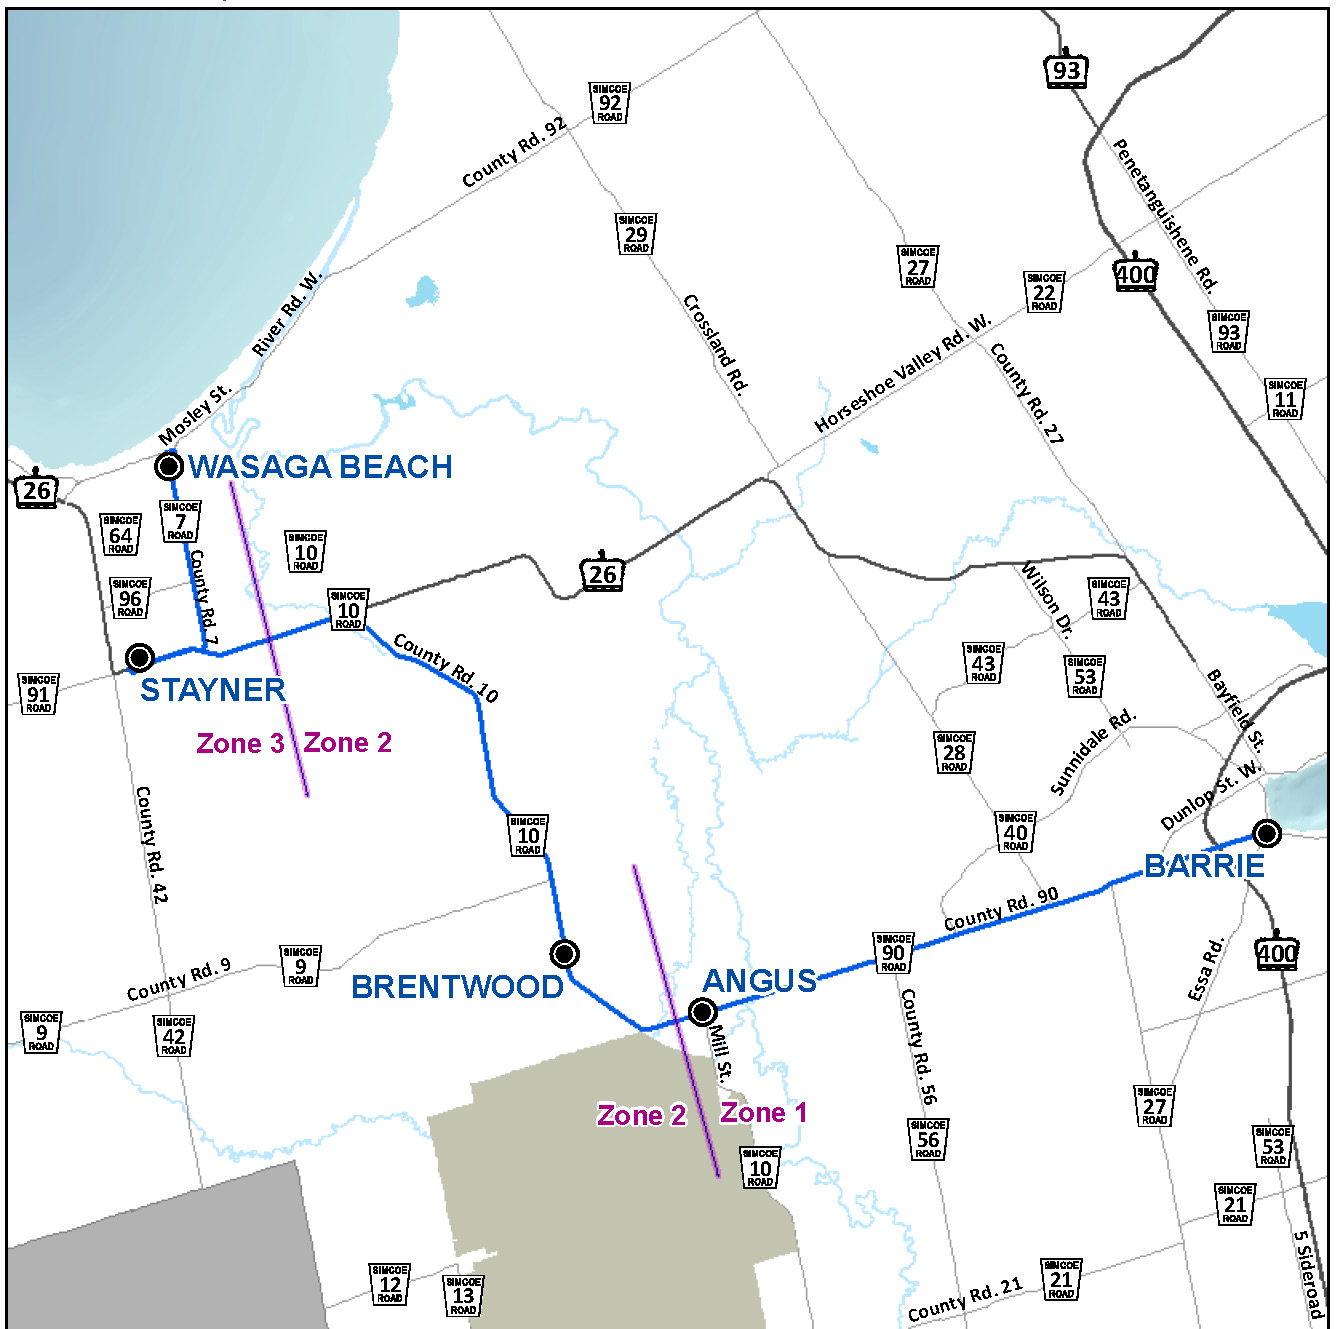 LINX Route 2 MAP